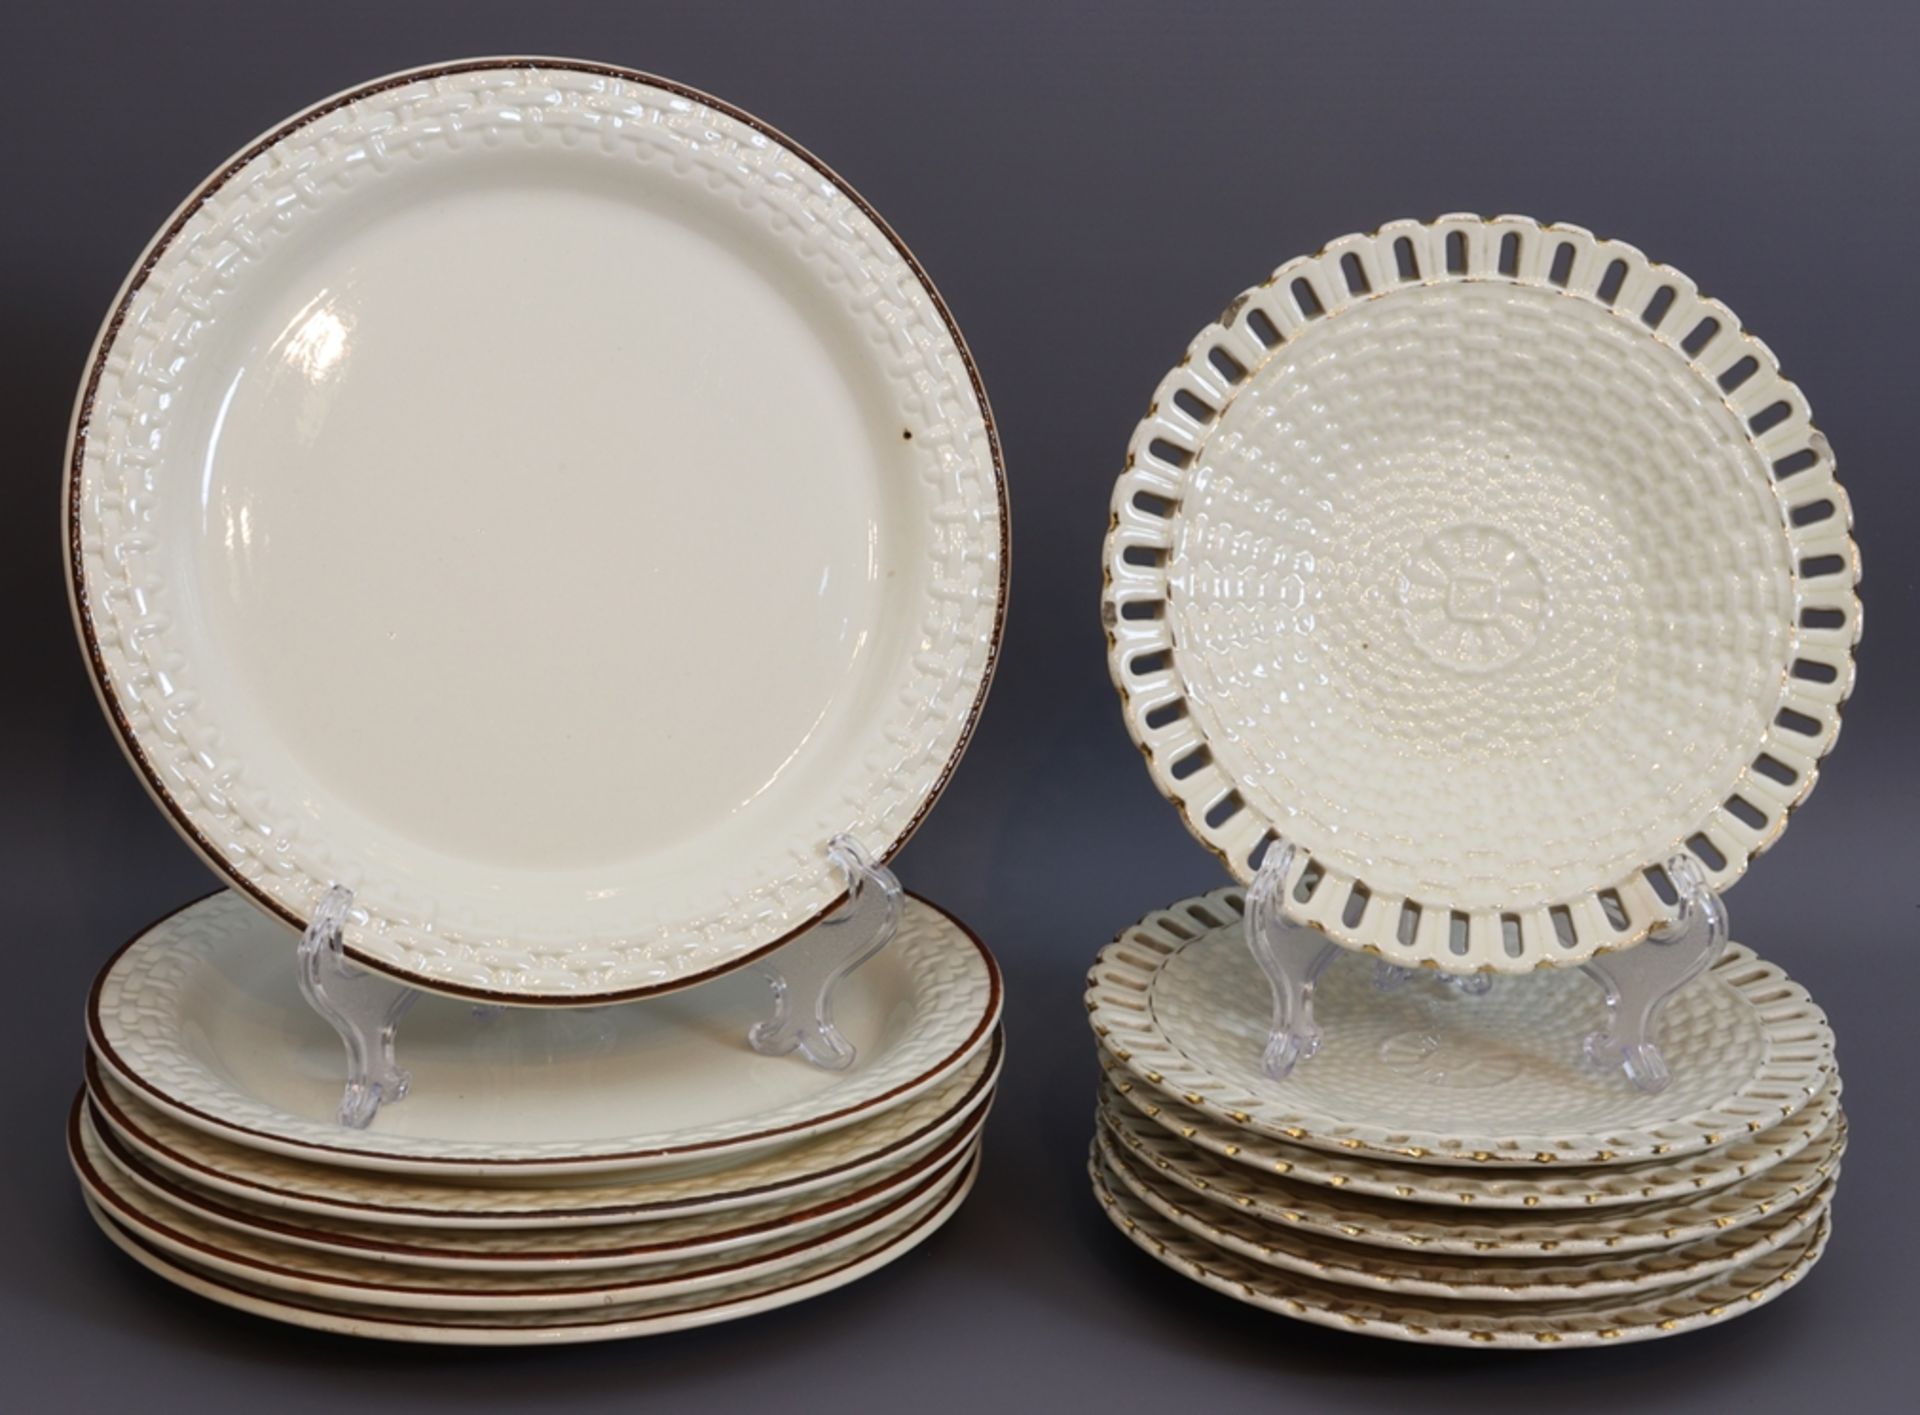 Two sets of six decorative plates, first third of the 20th century, German